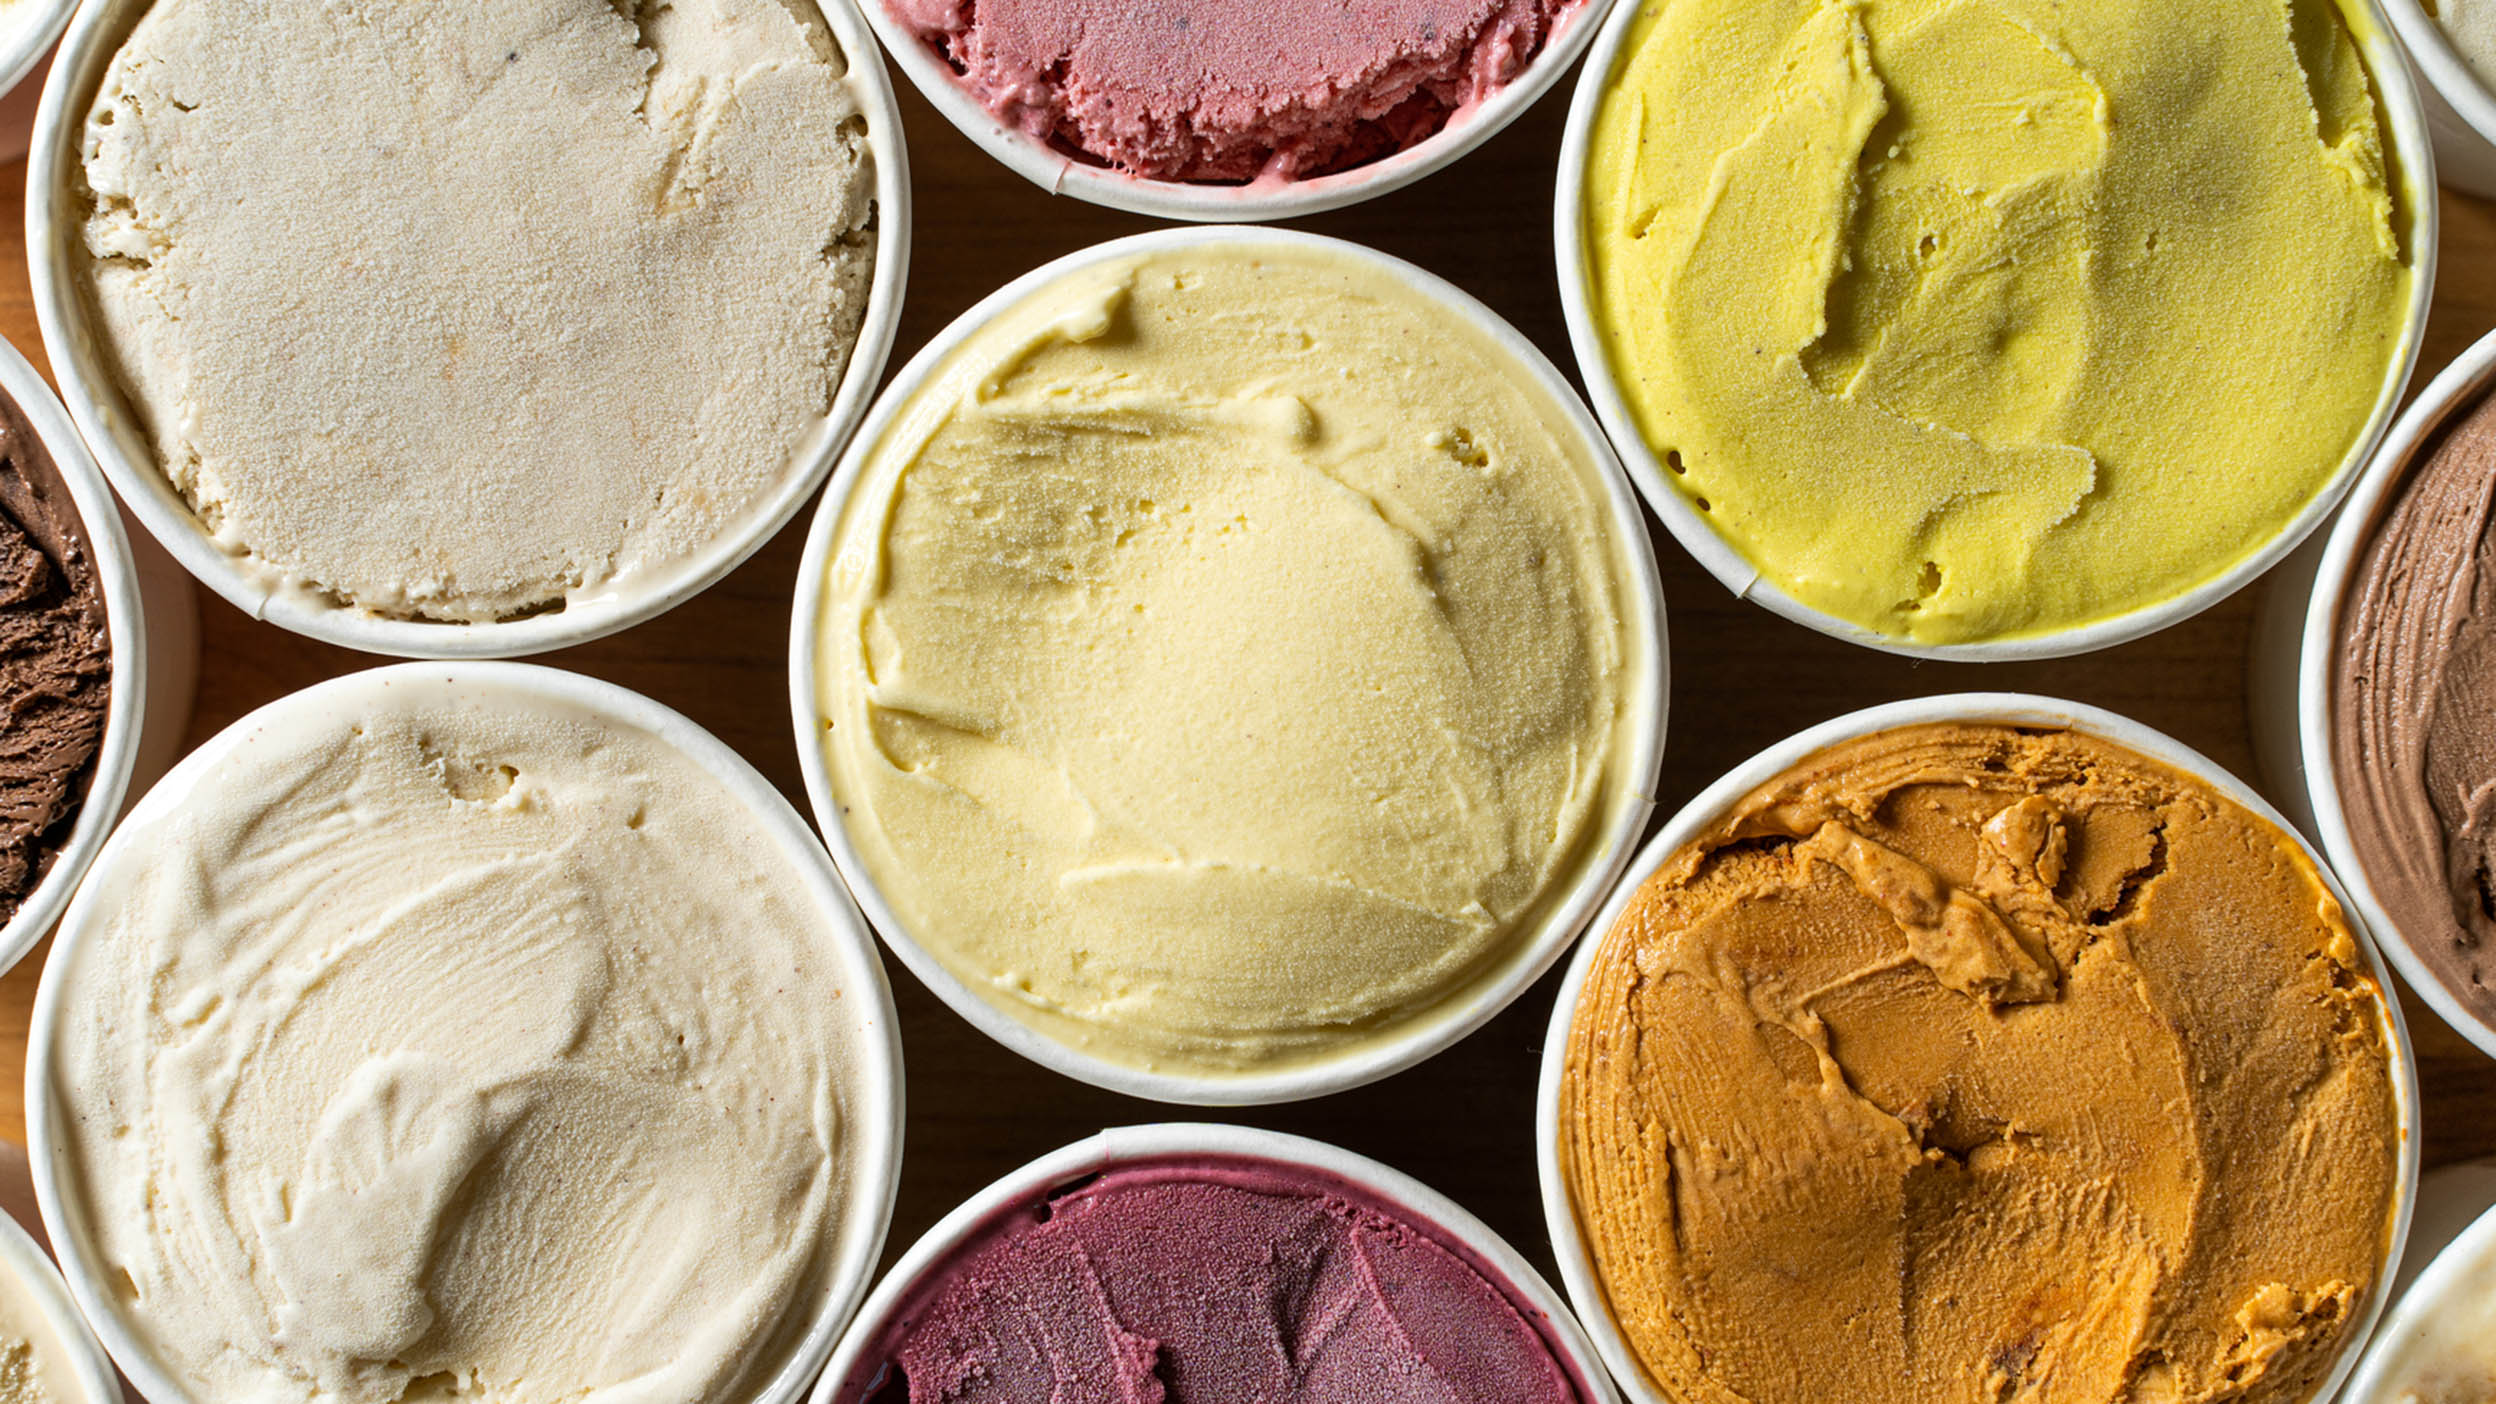 Various buckets of multiple ice cream flavors.